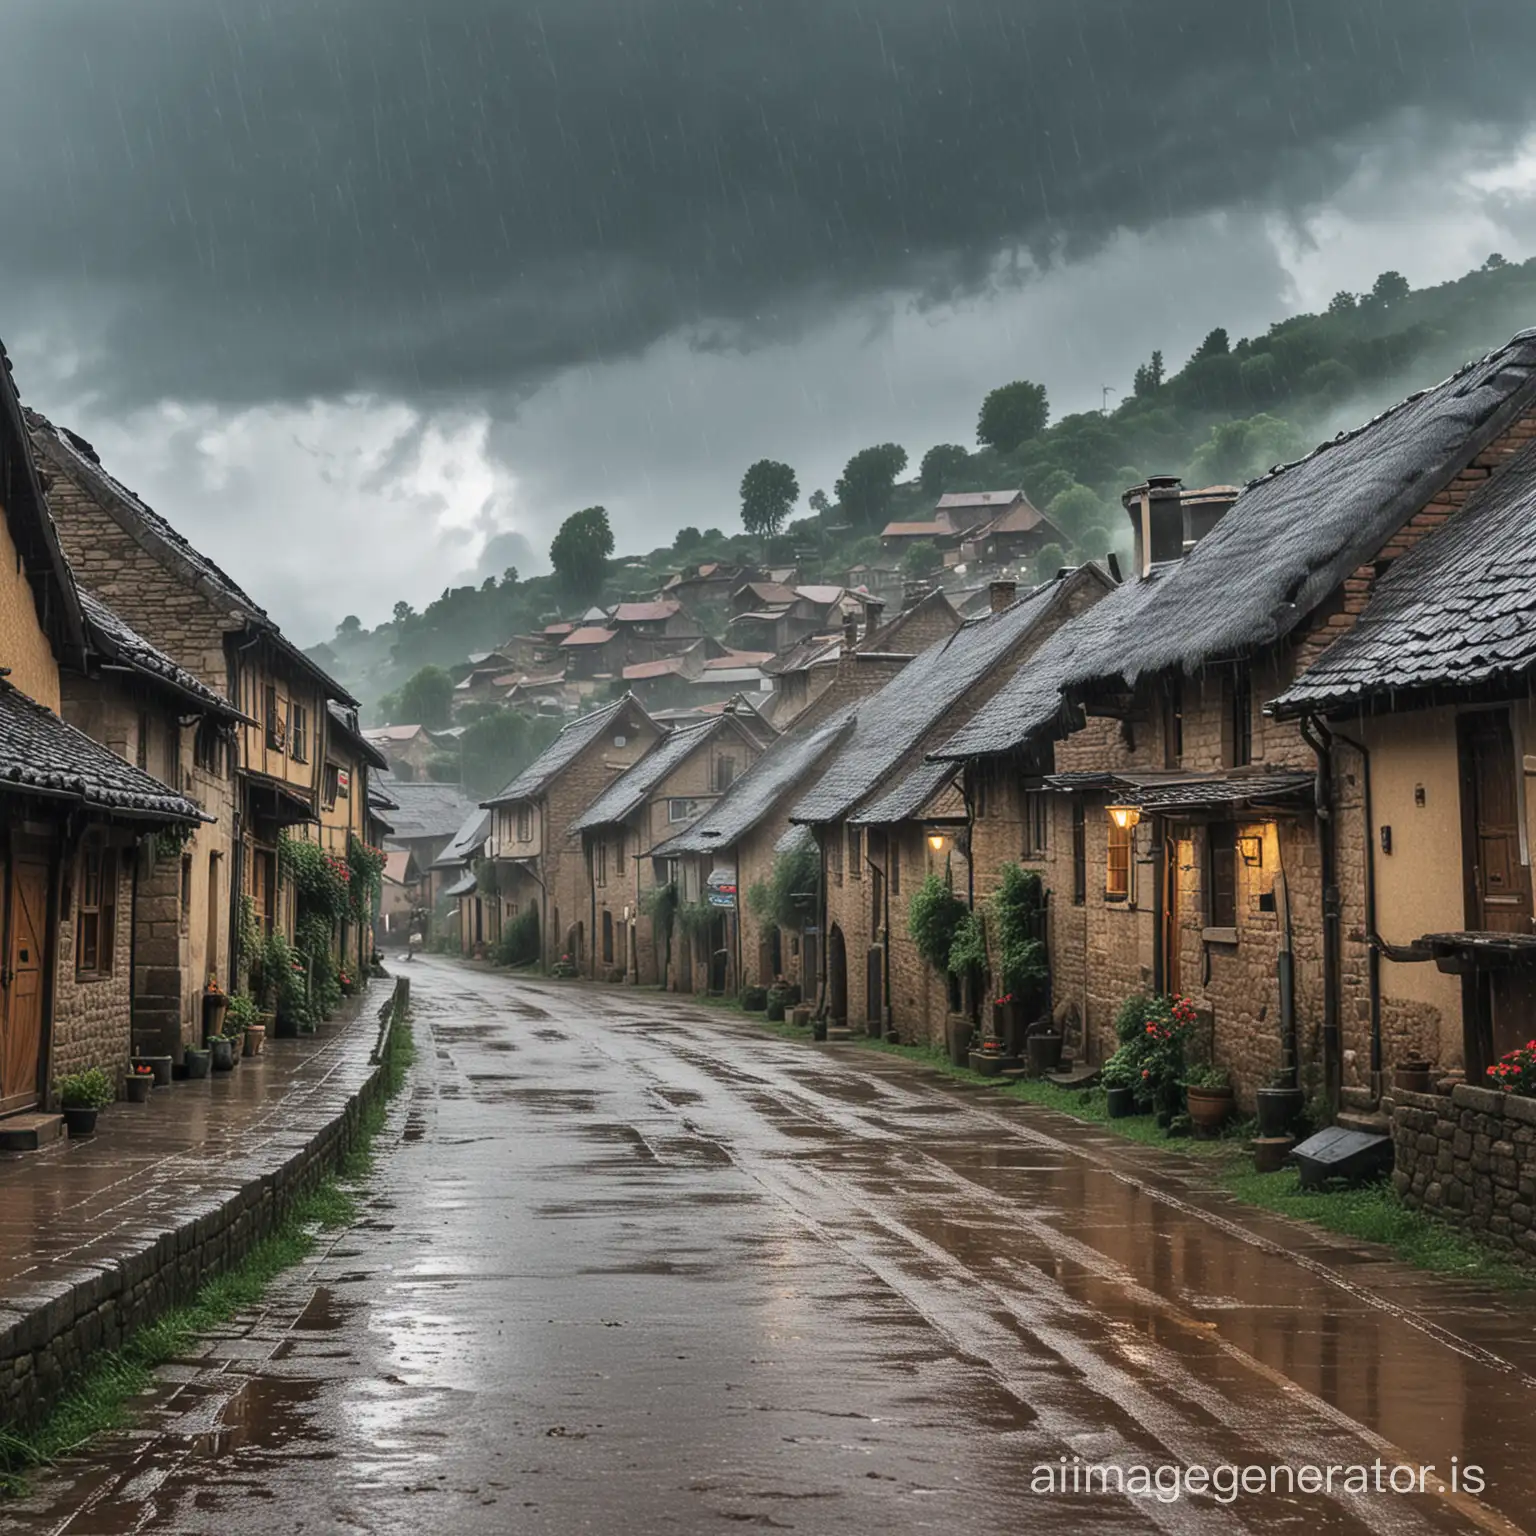 Rainy-Day-in-a-Serene-Village-Setting